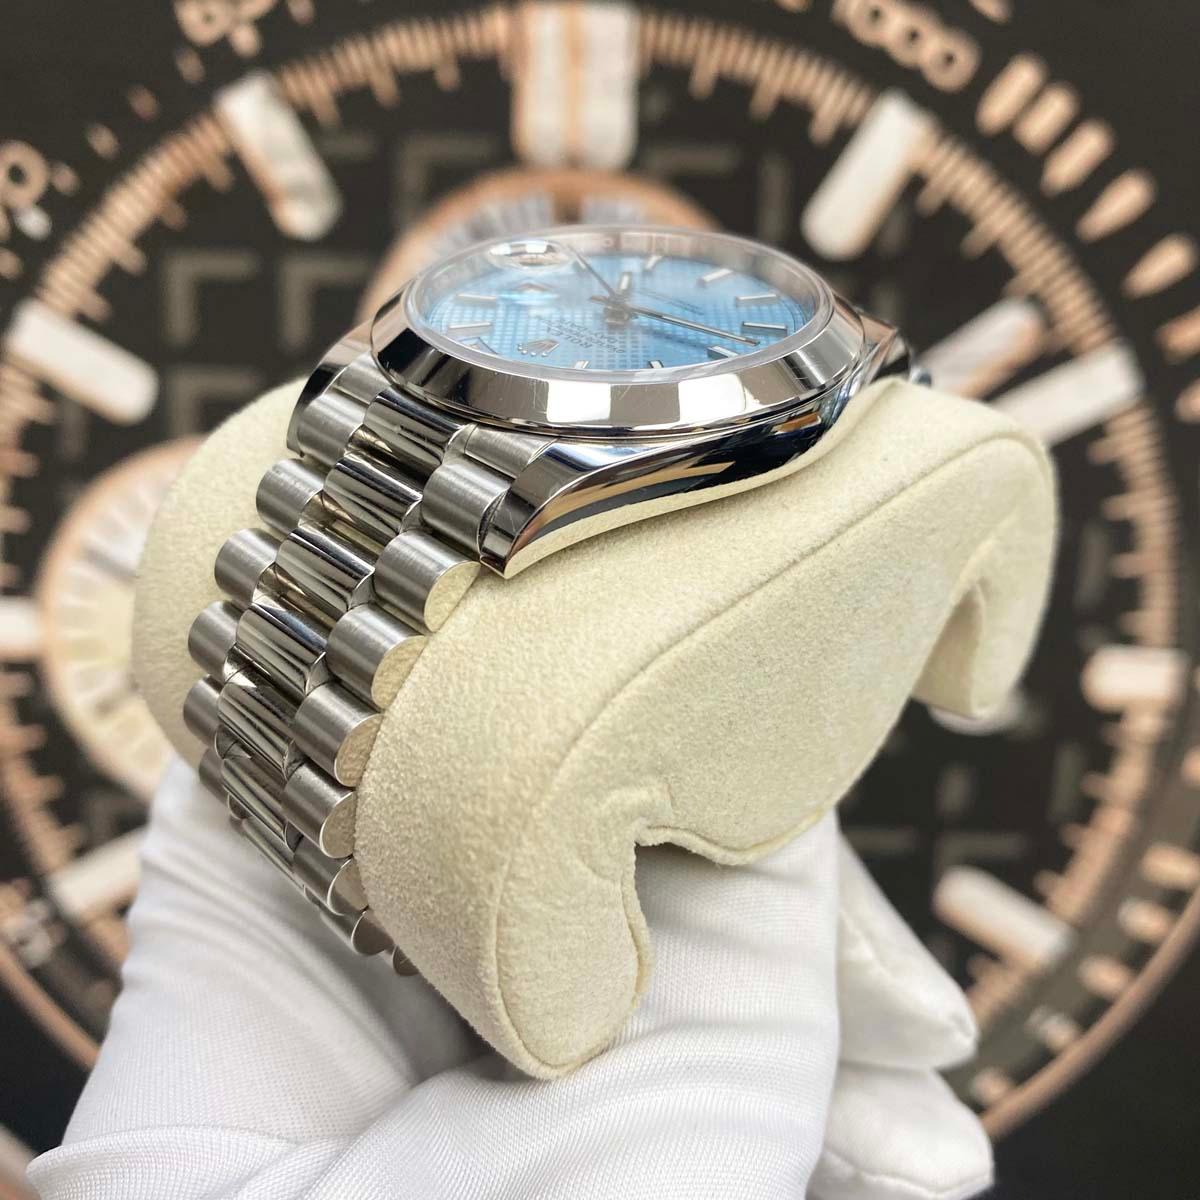 Rolex Day-Date 40 Platinum Presidential 228206 Smooth Bezel Ice Blue Diagonal Motif Dial Pre-Owned - Gotham Trading 